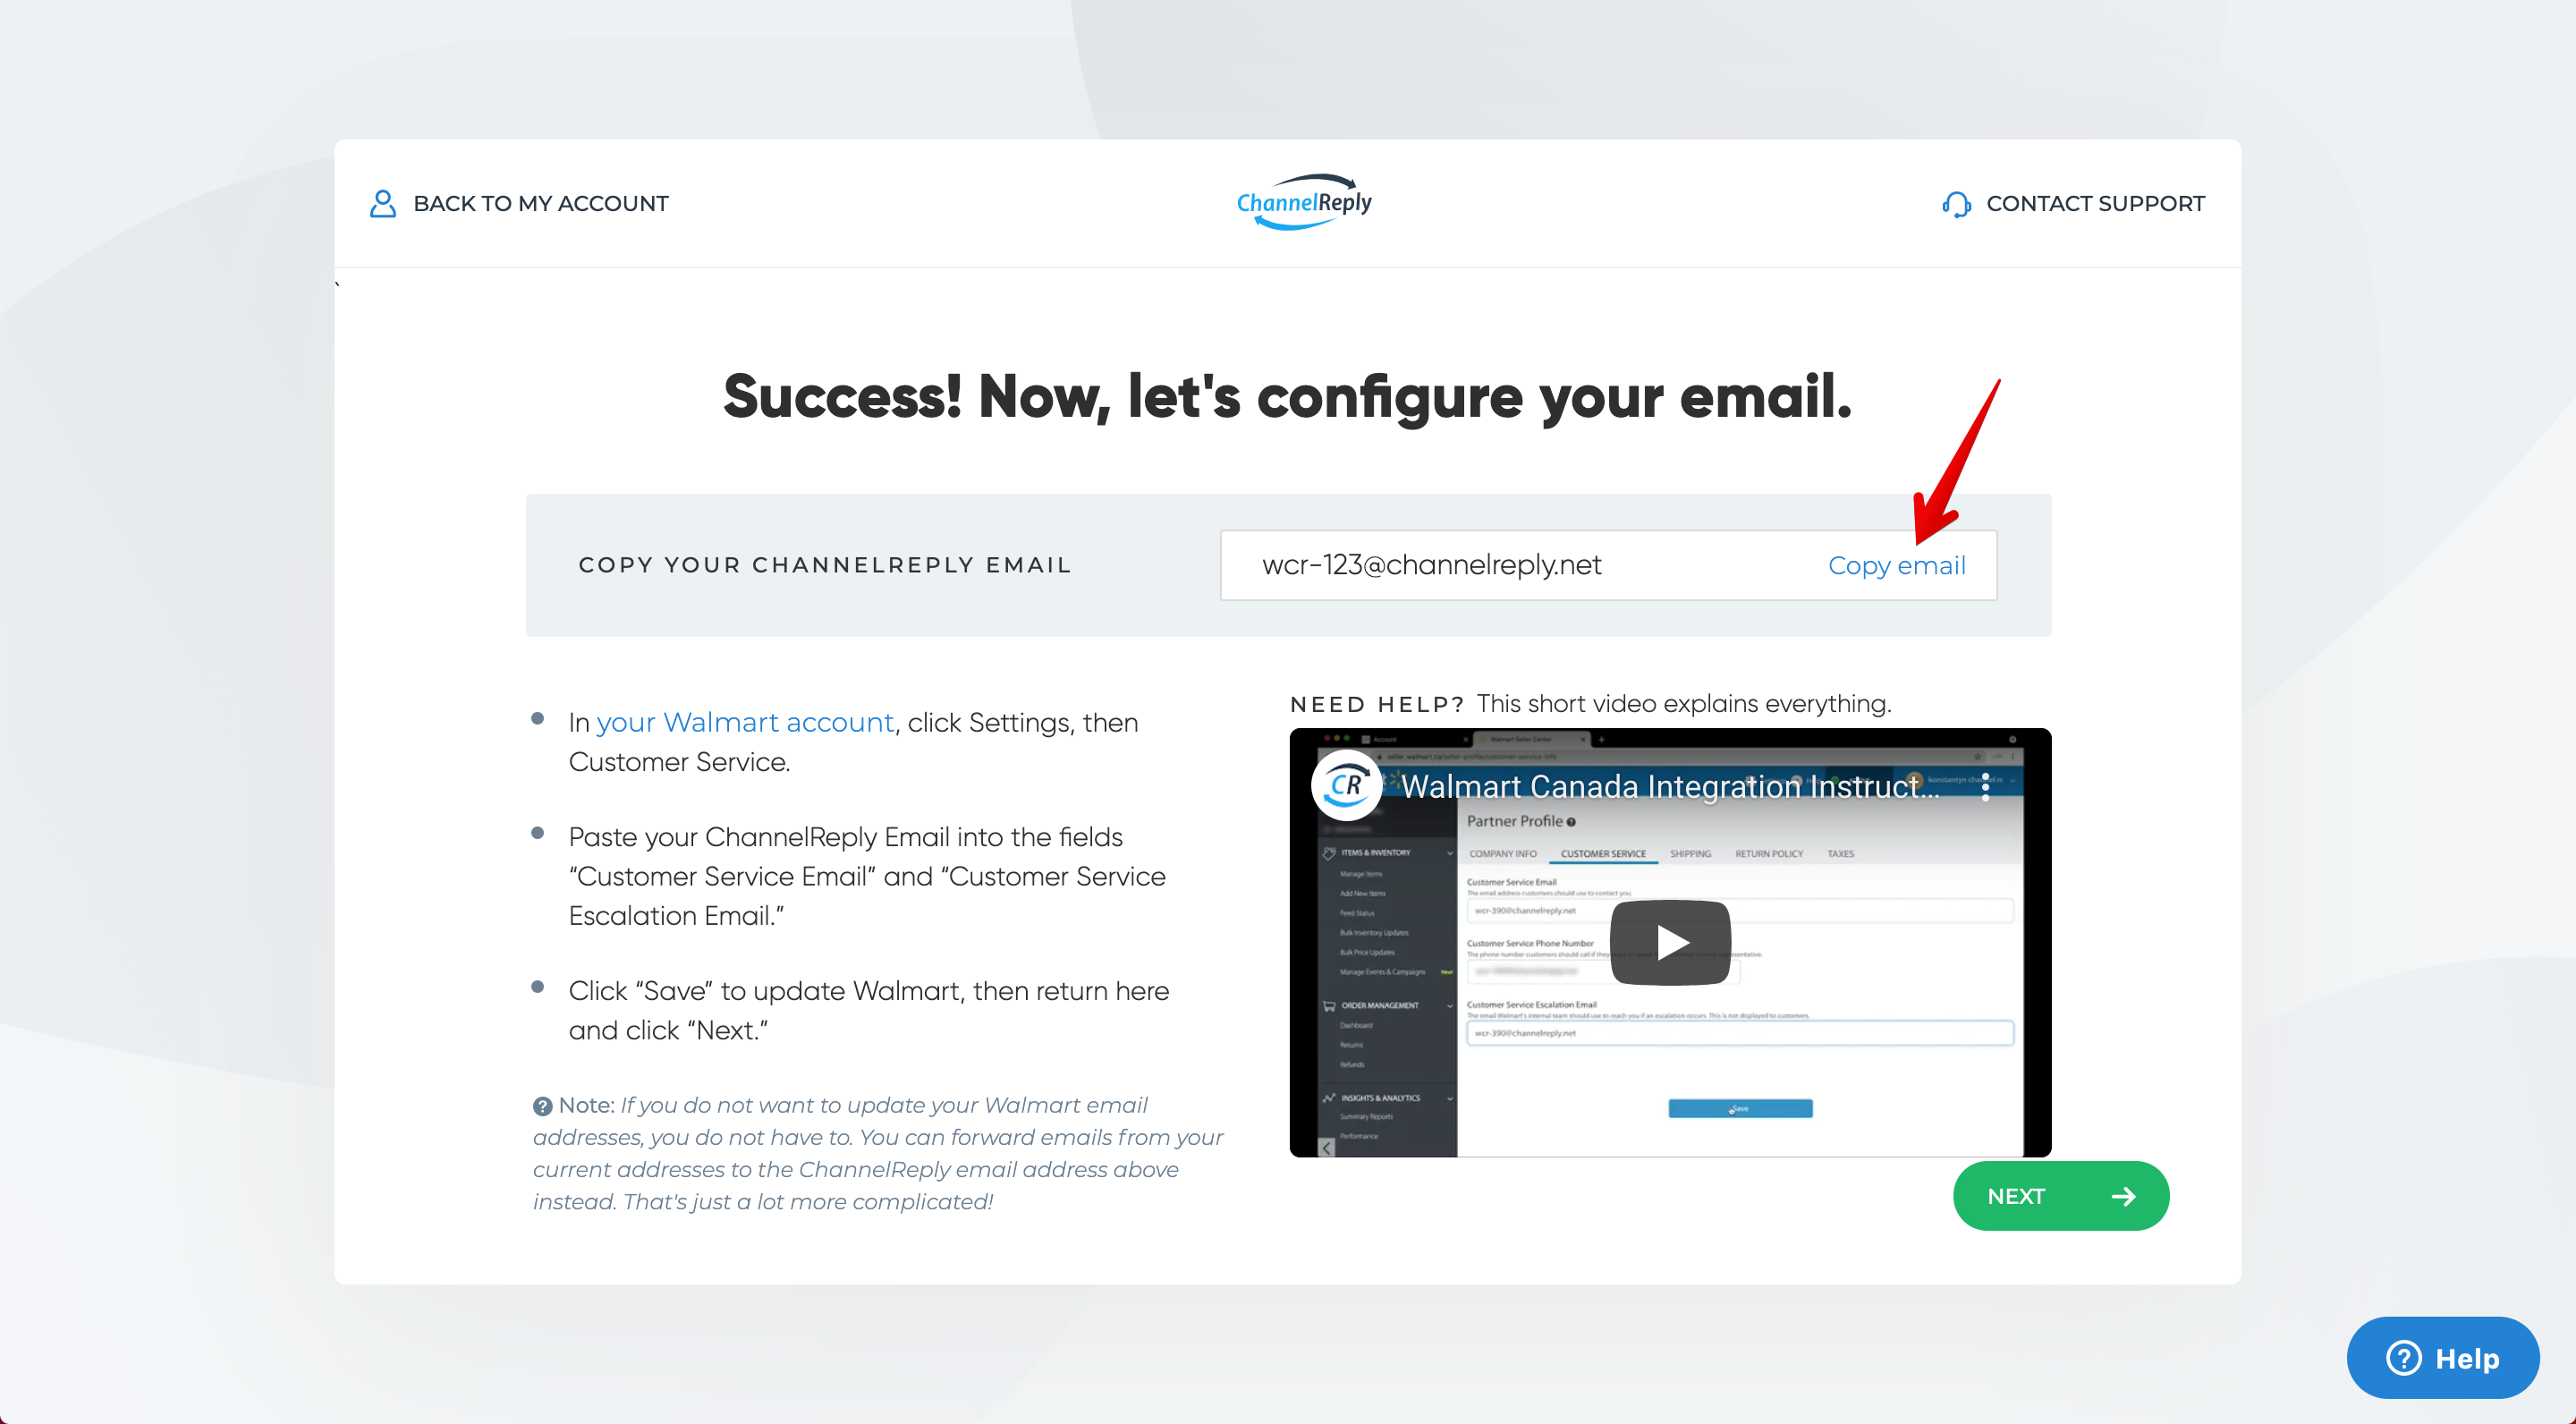 How to Copy Your ChannelReply Email